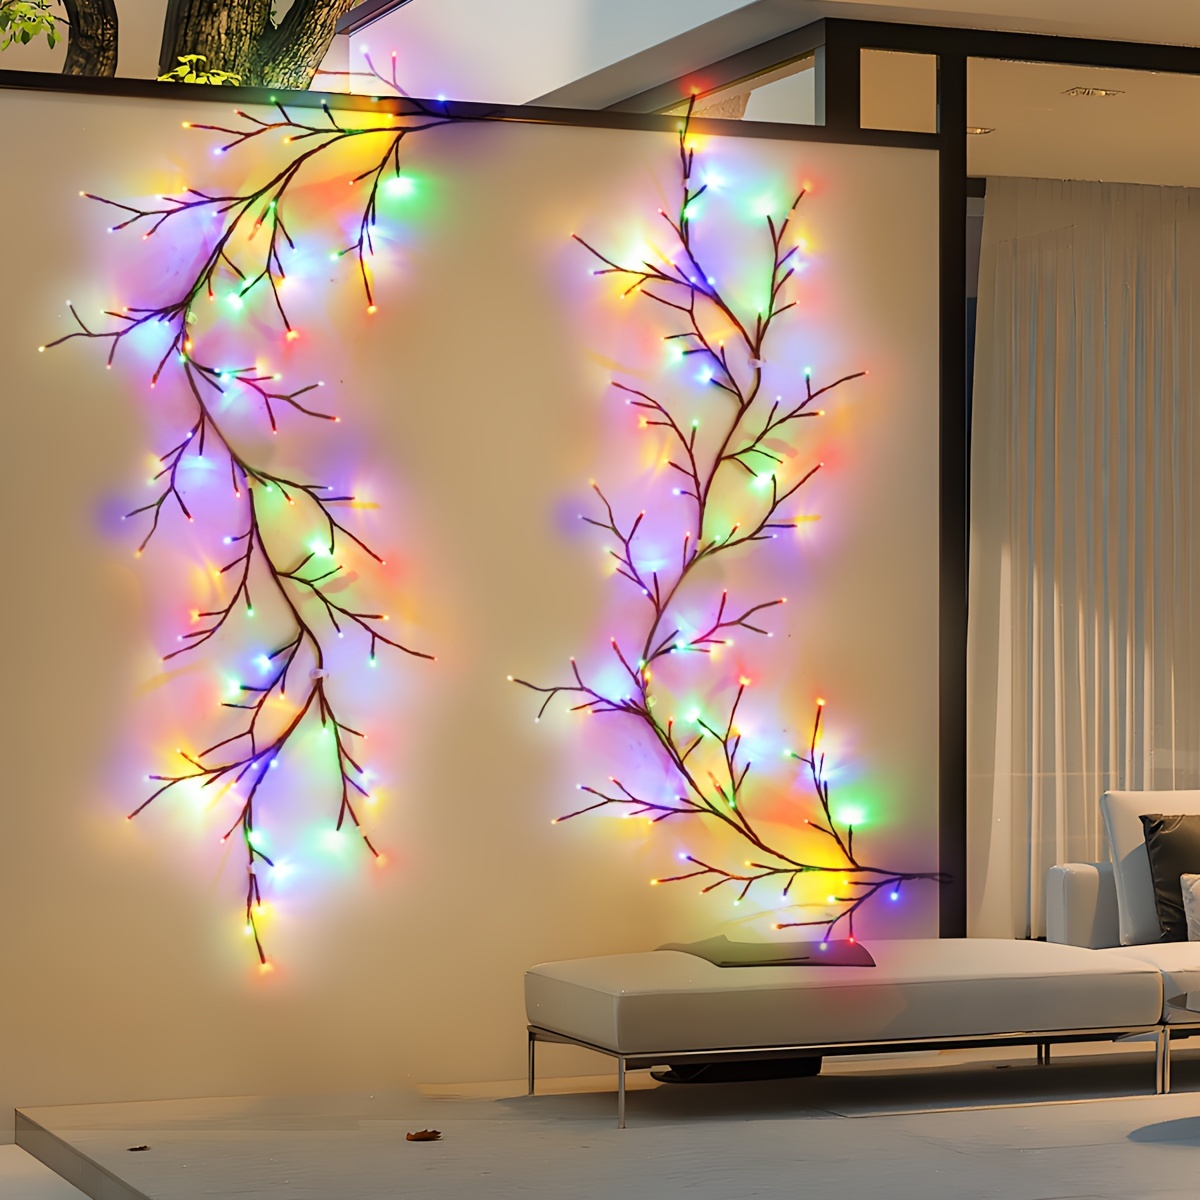 

1pc Solar String Light Outdoor, Willow Vine Lights, Christmas Swags Decorations Indoor Room Decor, 96 Leds Lighted Willow Vine Lights For Outdoor Garden Walls Bedroom Home Decor